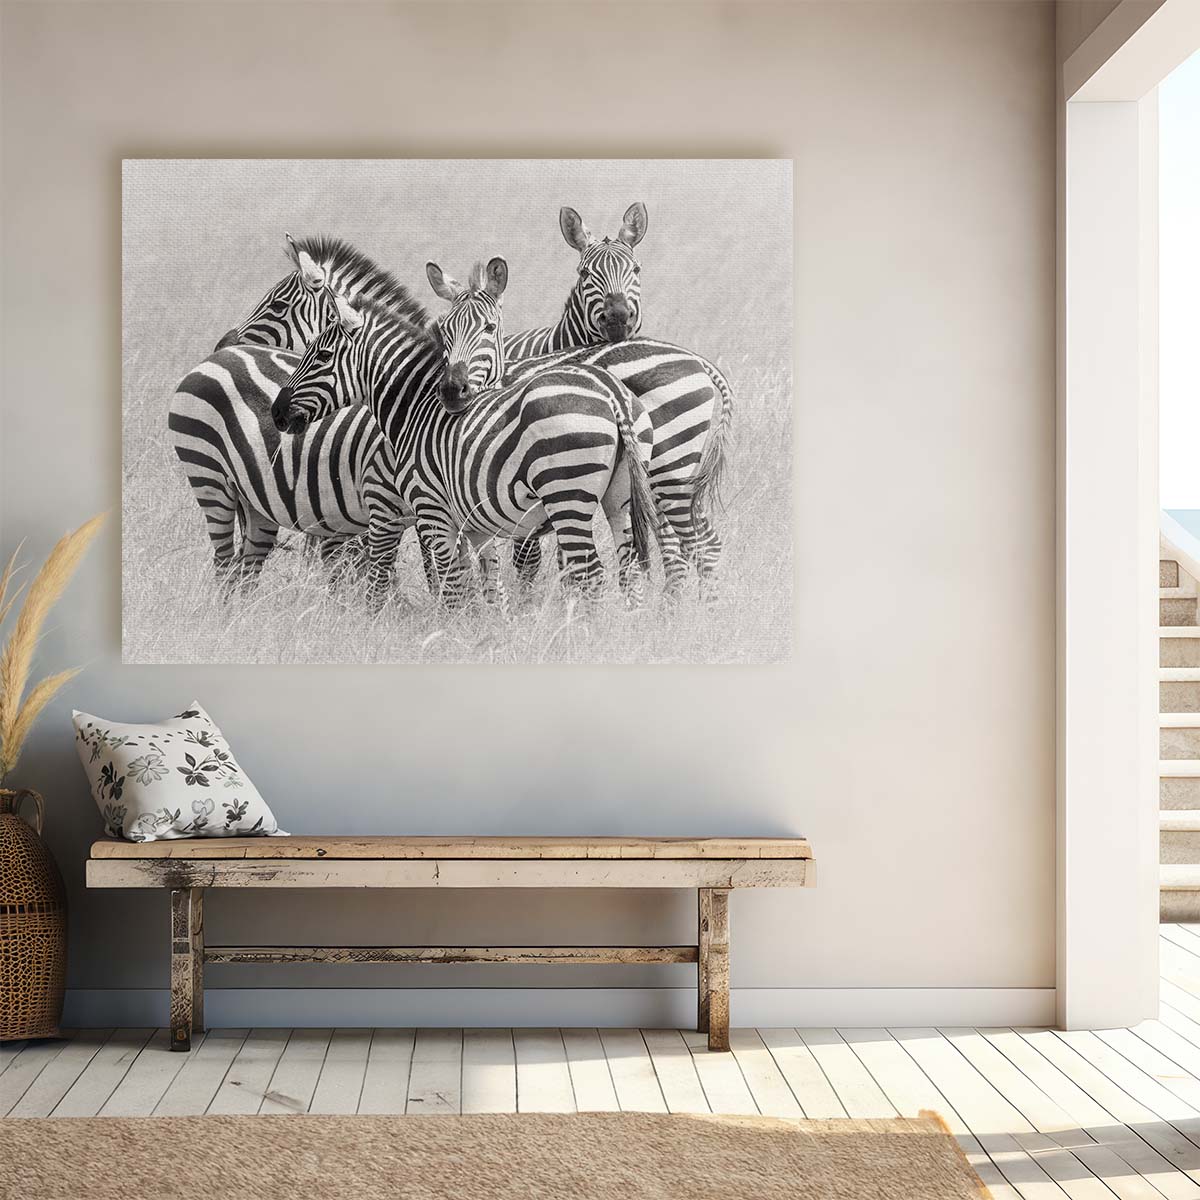 Embracing Zebras Family Love Safari Monochrome Wall Art by Luxuriance Designs. Made in USA.